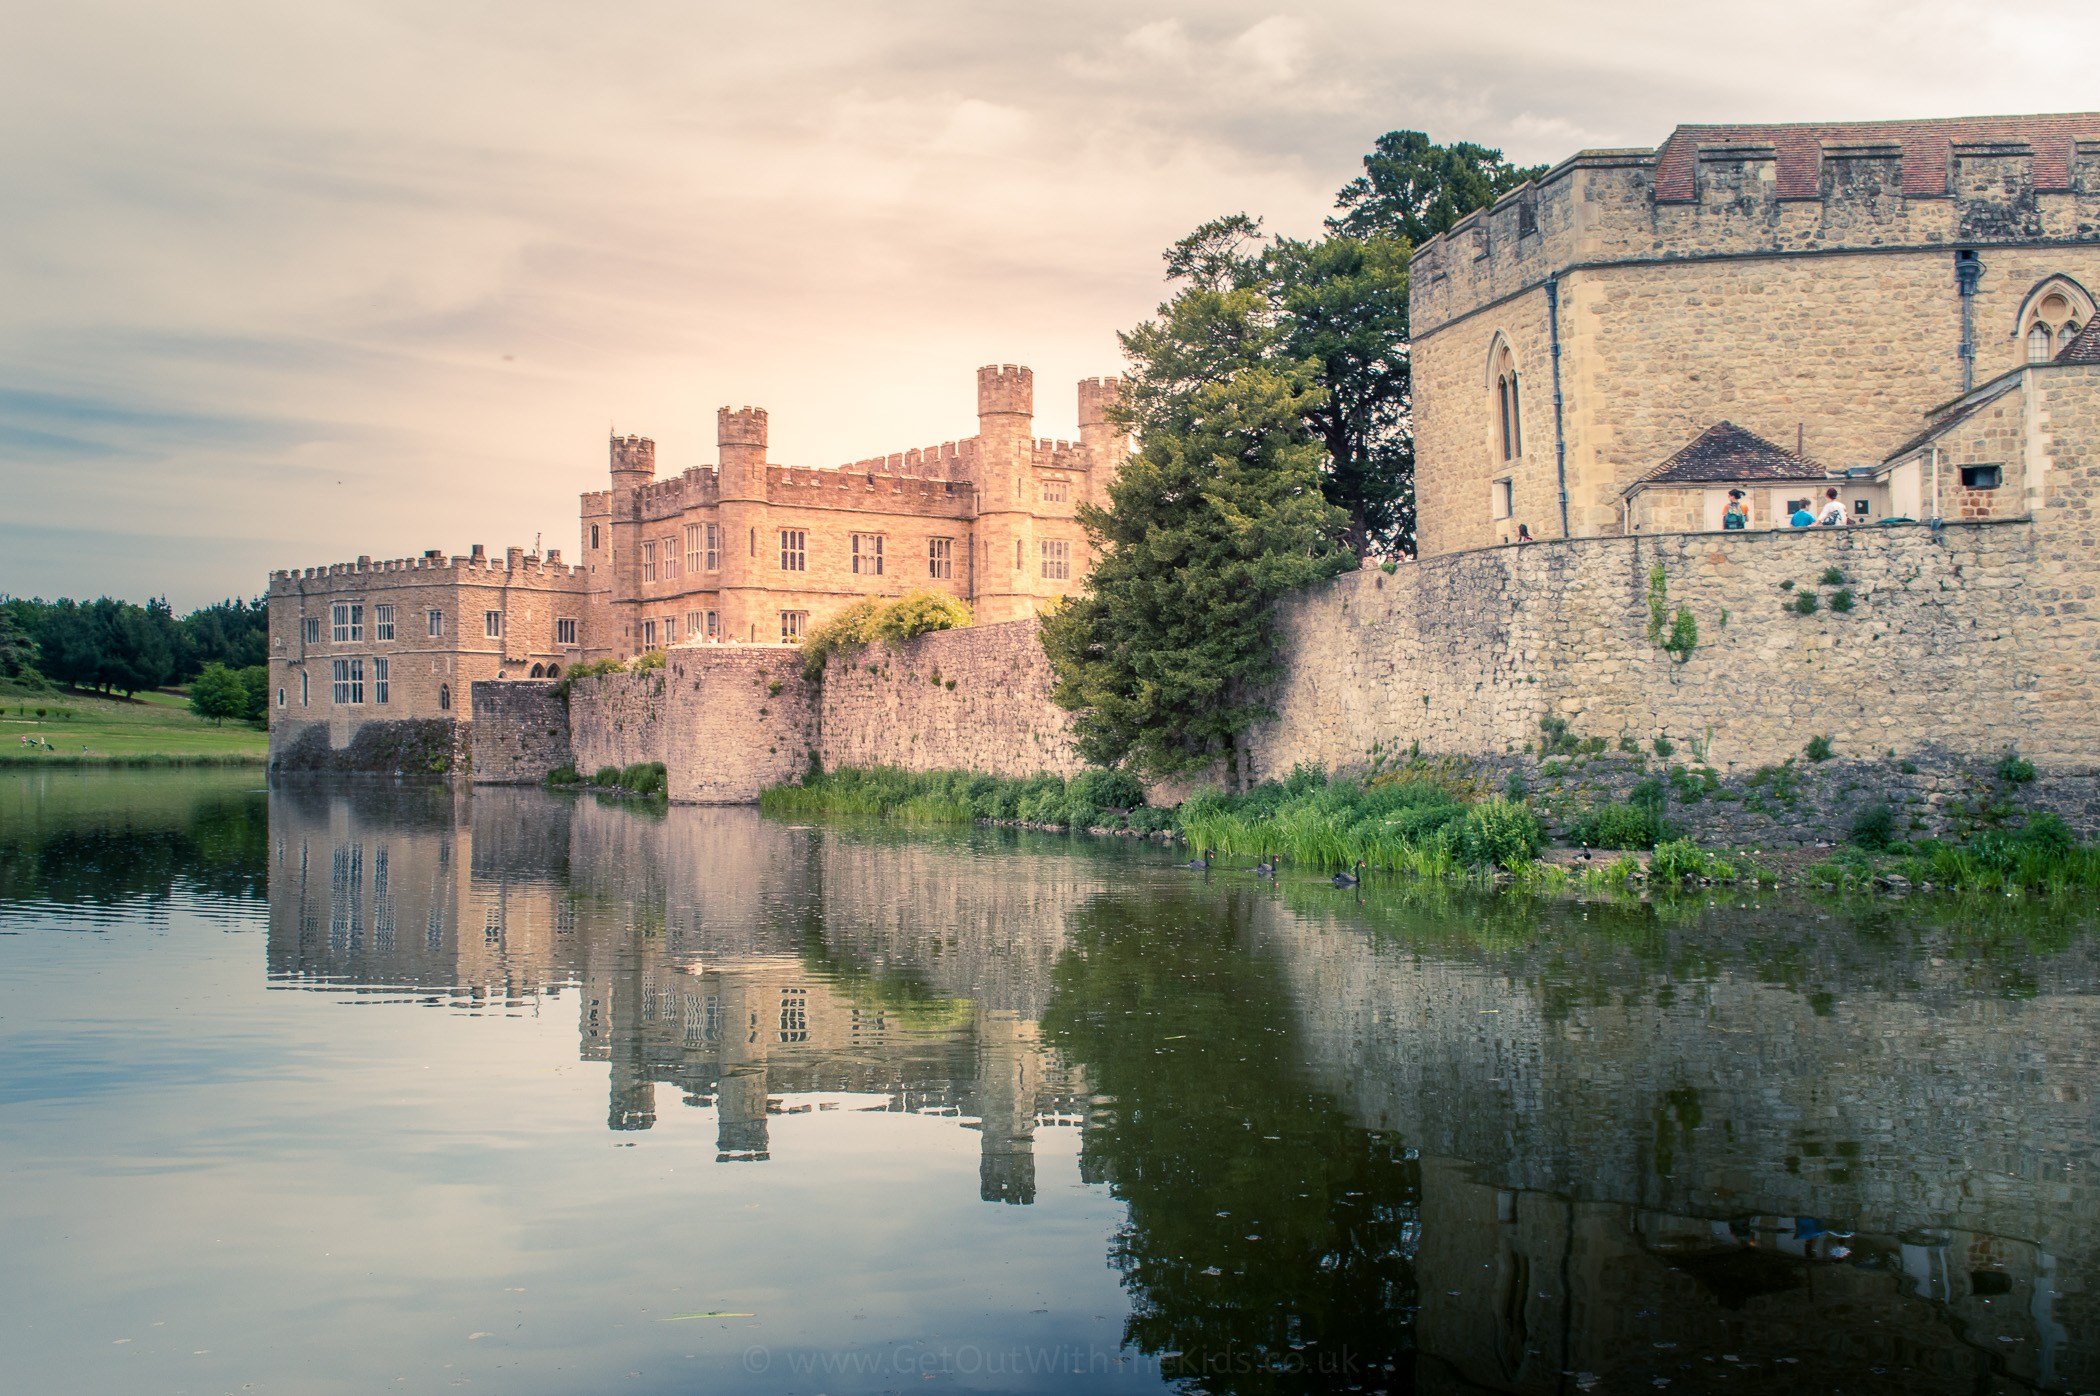 Leeds castle reflecting in the moat